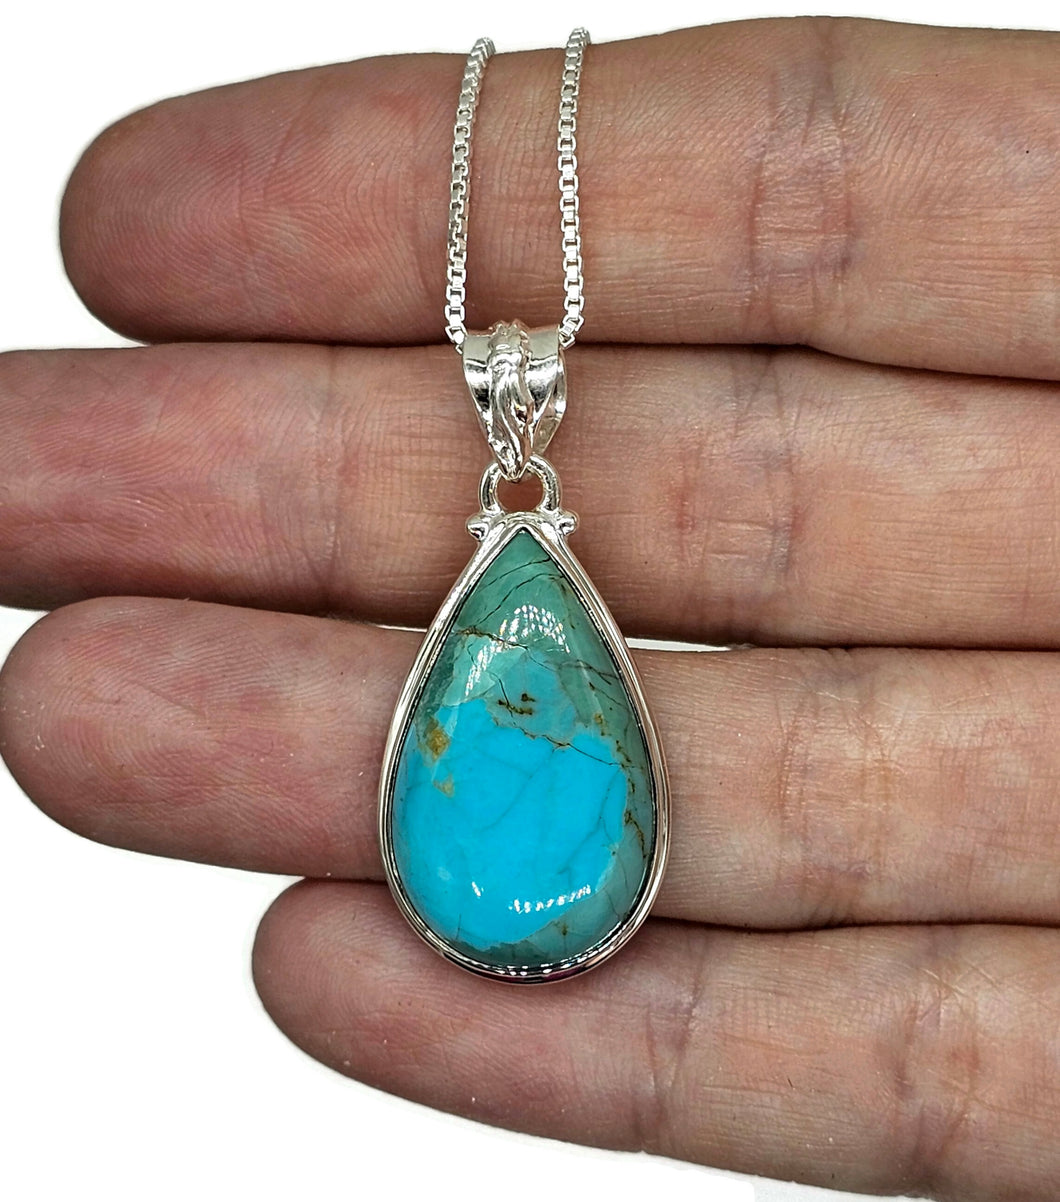 Turquoise Pendant, Pear Shaped, Sterling Silver, December Birthstone - GemzAustralia 